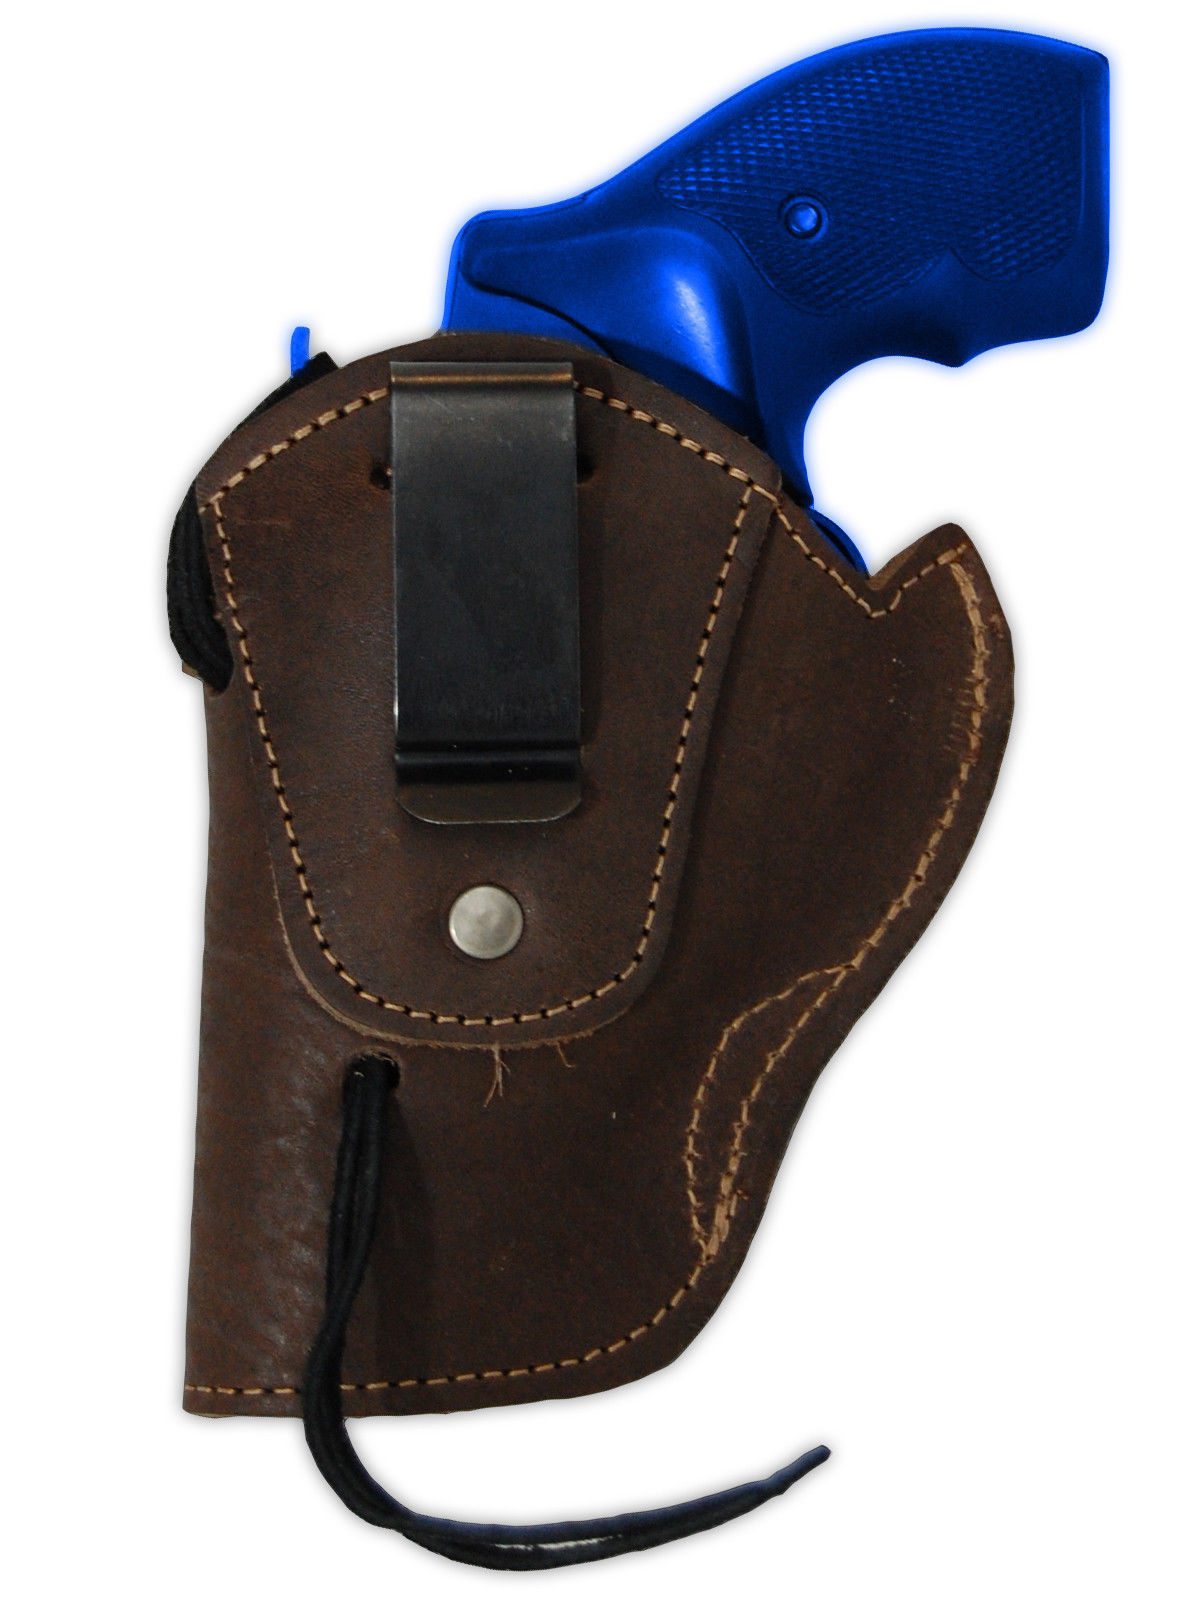 NEW Barsony Brown Leather Western Style Holster for Ruger 22 38 357 Snub No...